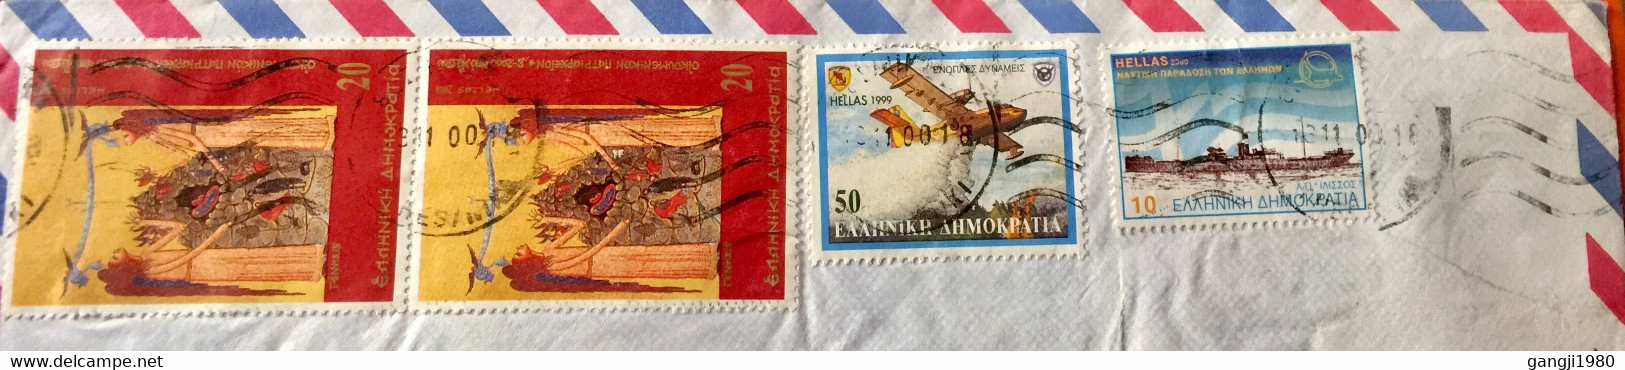 GREECE 2000, USED AIRMAIL COVER TO INDIA,4 STAMPS ,SHIP ,AEROPLANE,ART, PAINTING,WOMEN,GIRLS,THESSALONIKI,CANCELLATION - Lettres & Documents